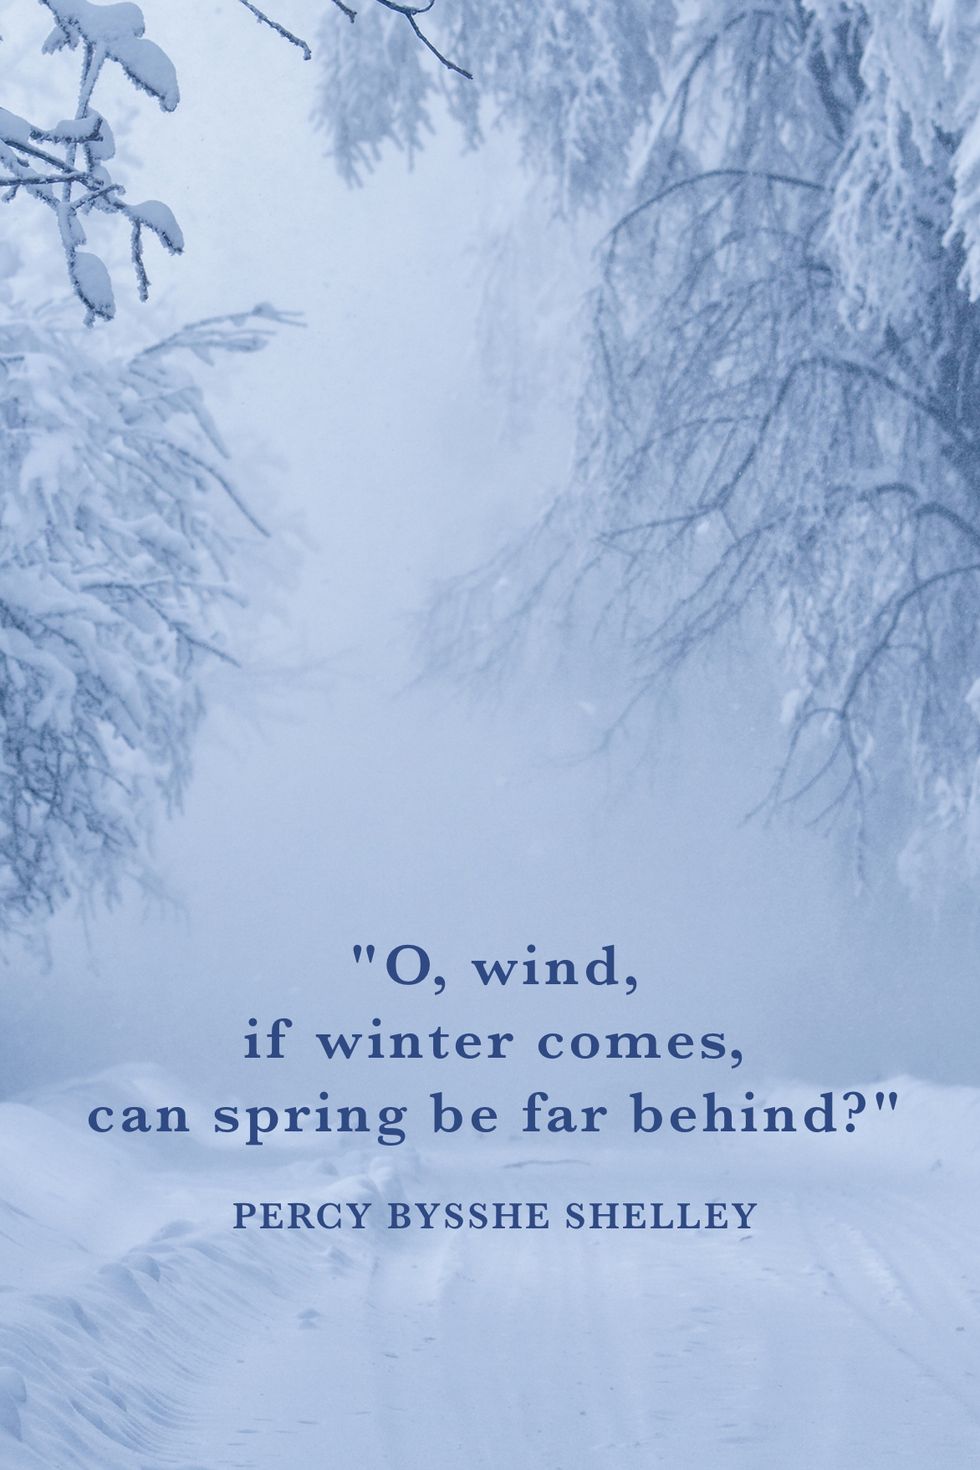 43 Best Winter Quotes - Snow Quotes and Sayings You'll Love